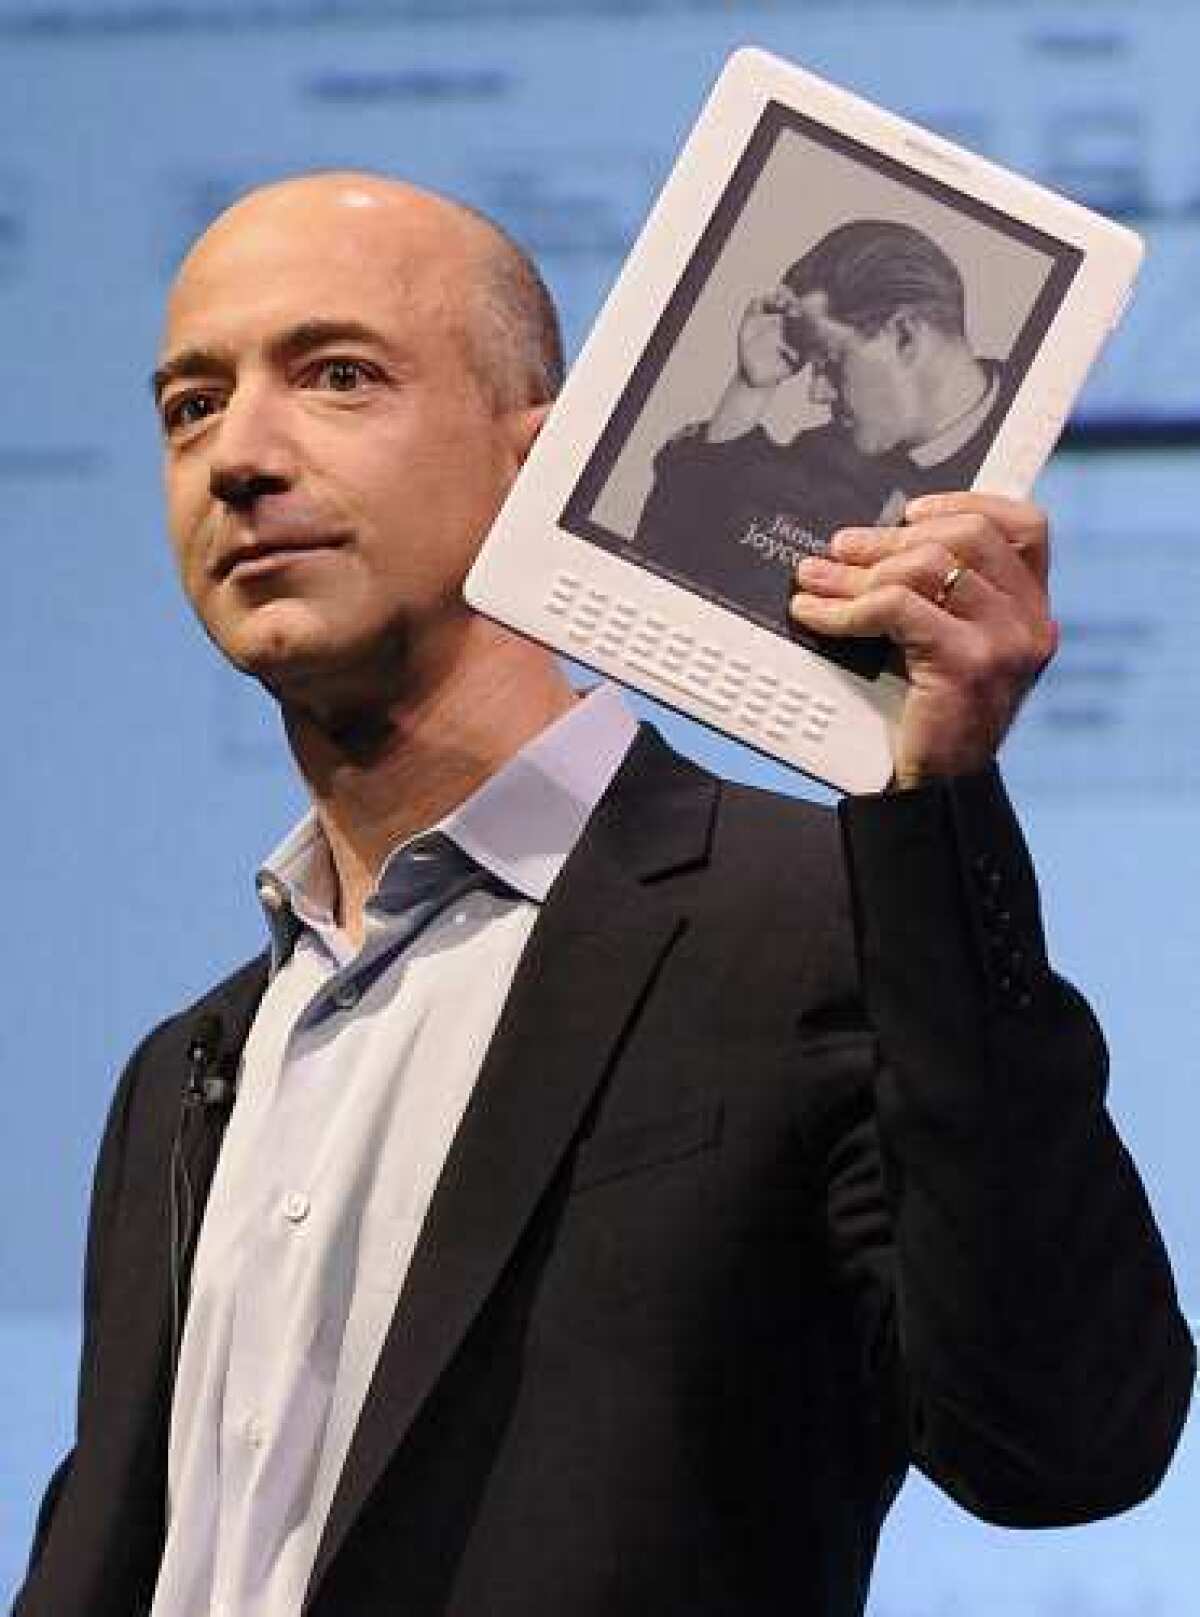 Amazon.com founder and CEO Jeff Bezos, holding a Kindle, says his team of ¿undersea pros¿ had found the engines that helped launch the Apollo 11 mission.